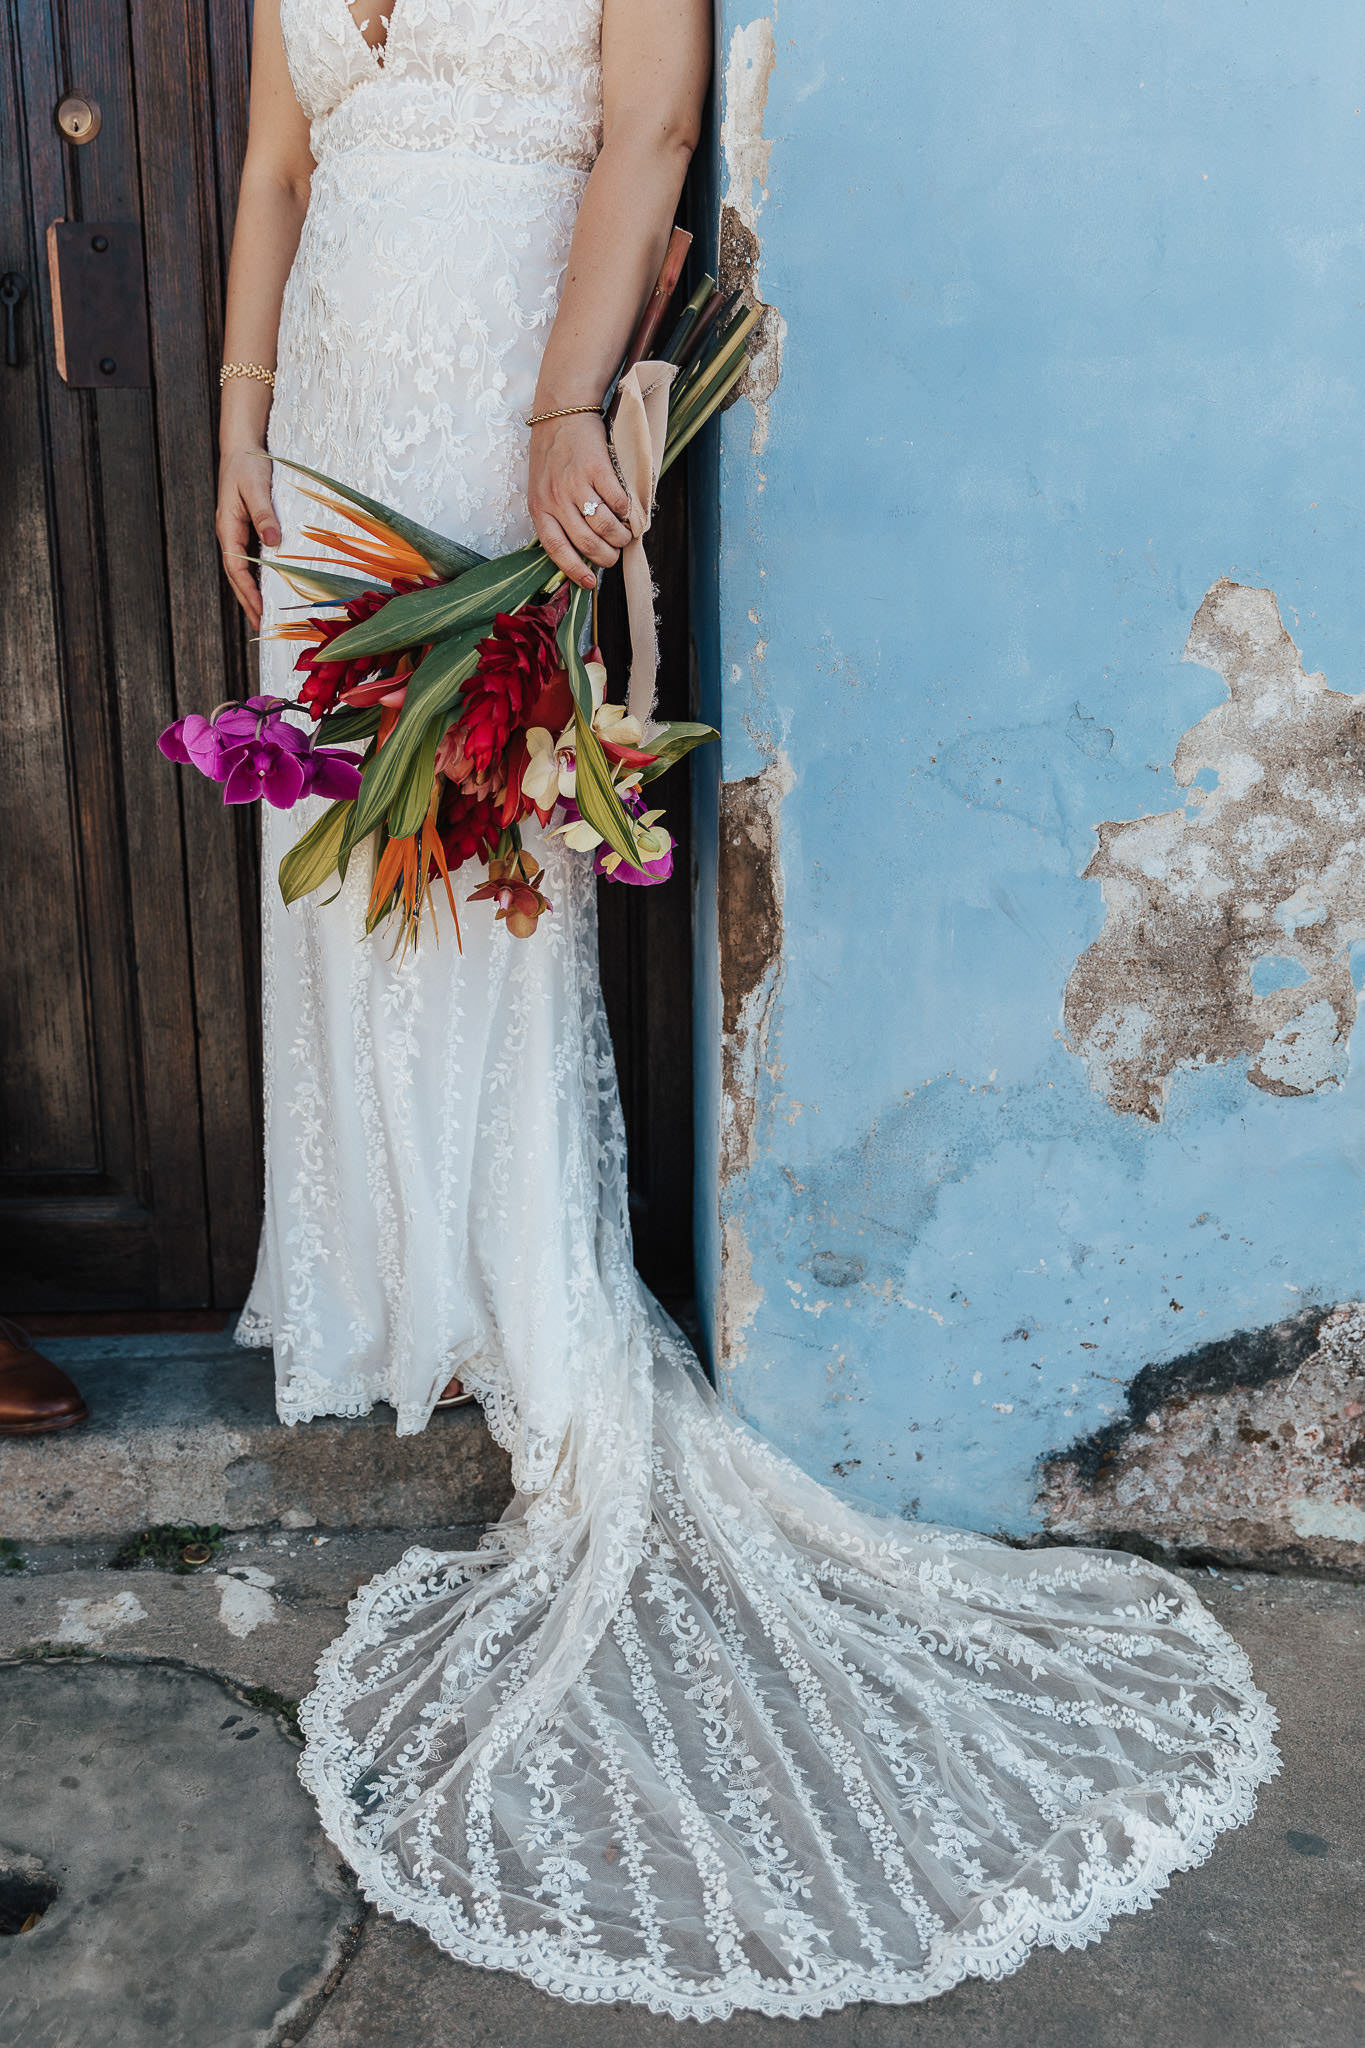 Stylish bride in stunning wedding dress and colorful, tropical bouguet